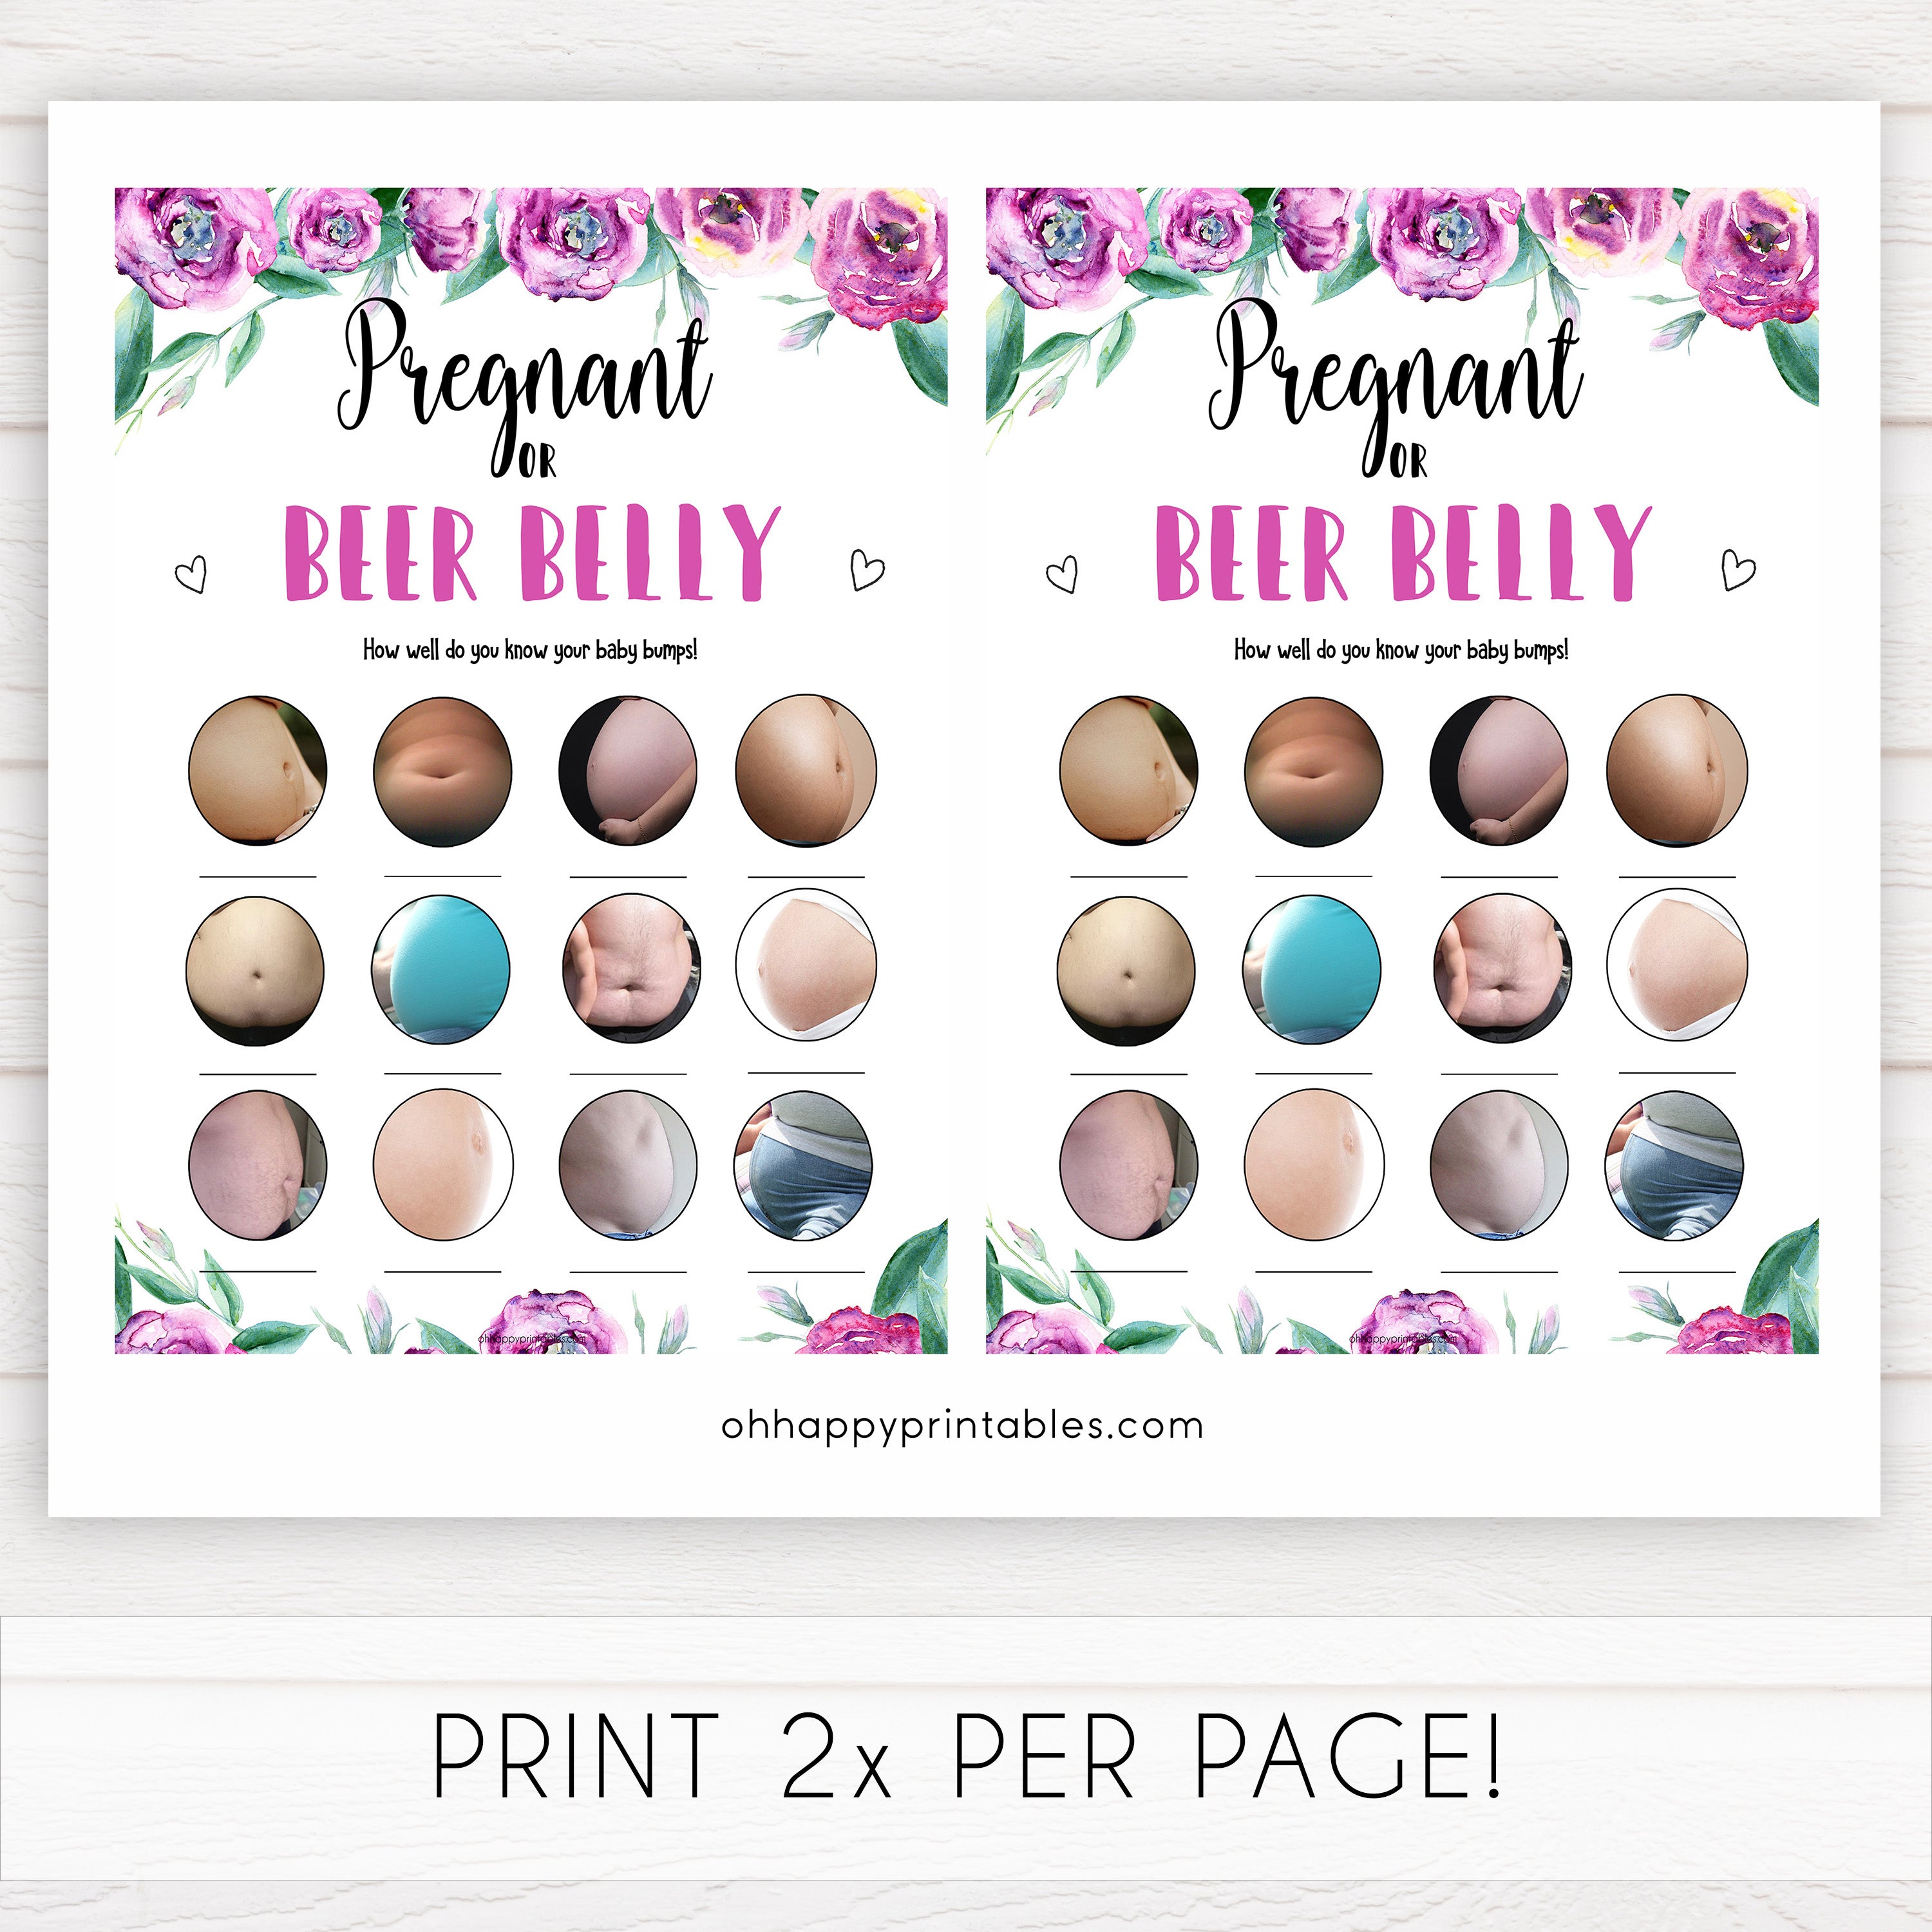 Purple peonies pregnant or beer belly baby shower games, printable baby shower games, fun baby shower games, baby shower games, popular baby shower games, floral baby shower games, purple baby shower themes